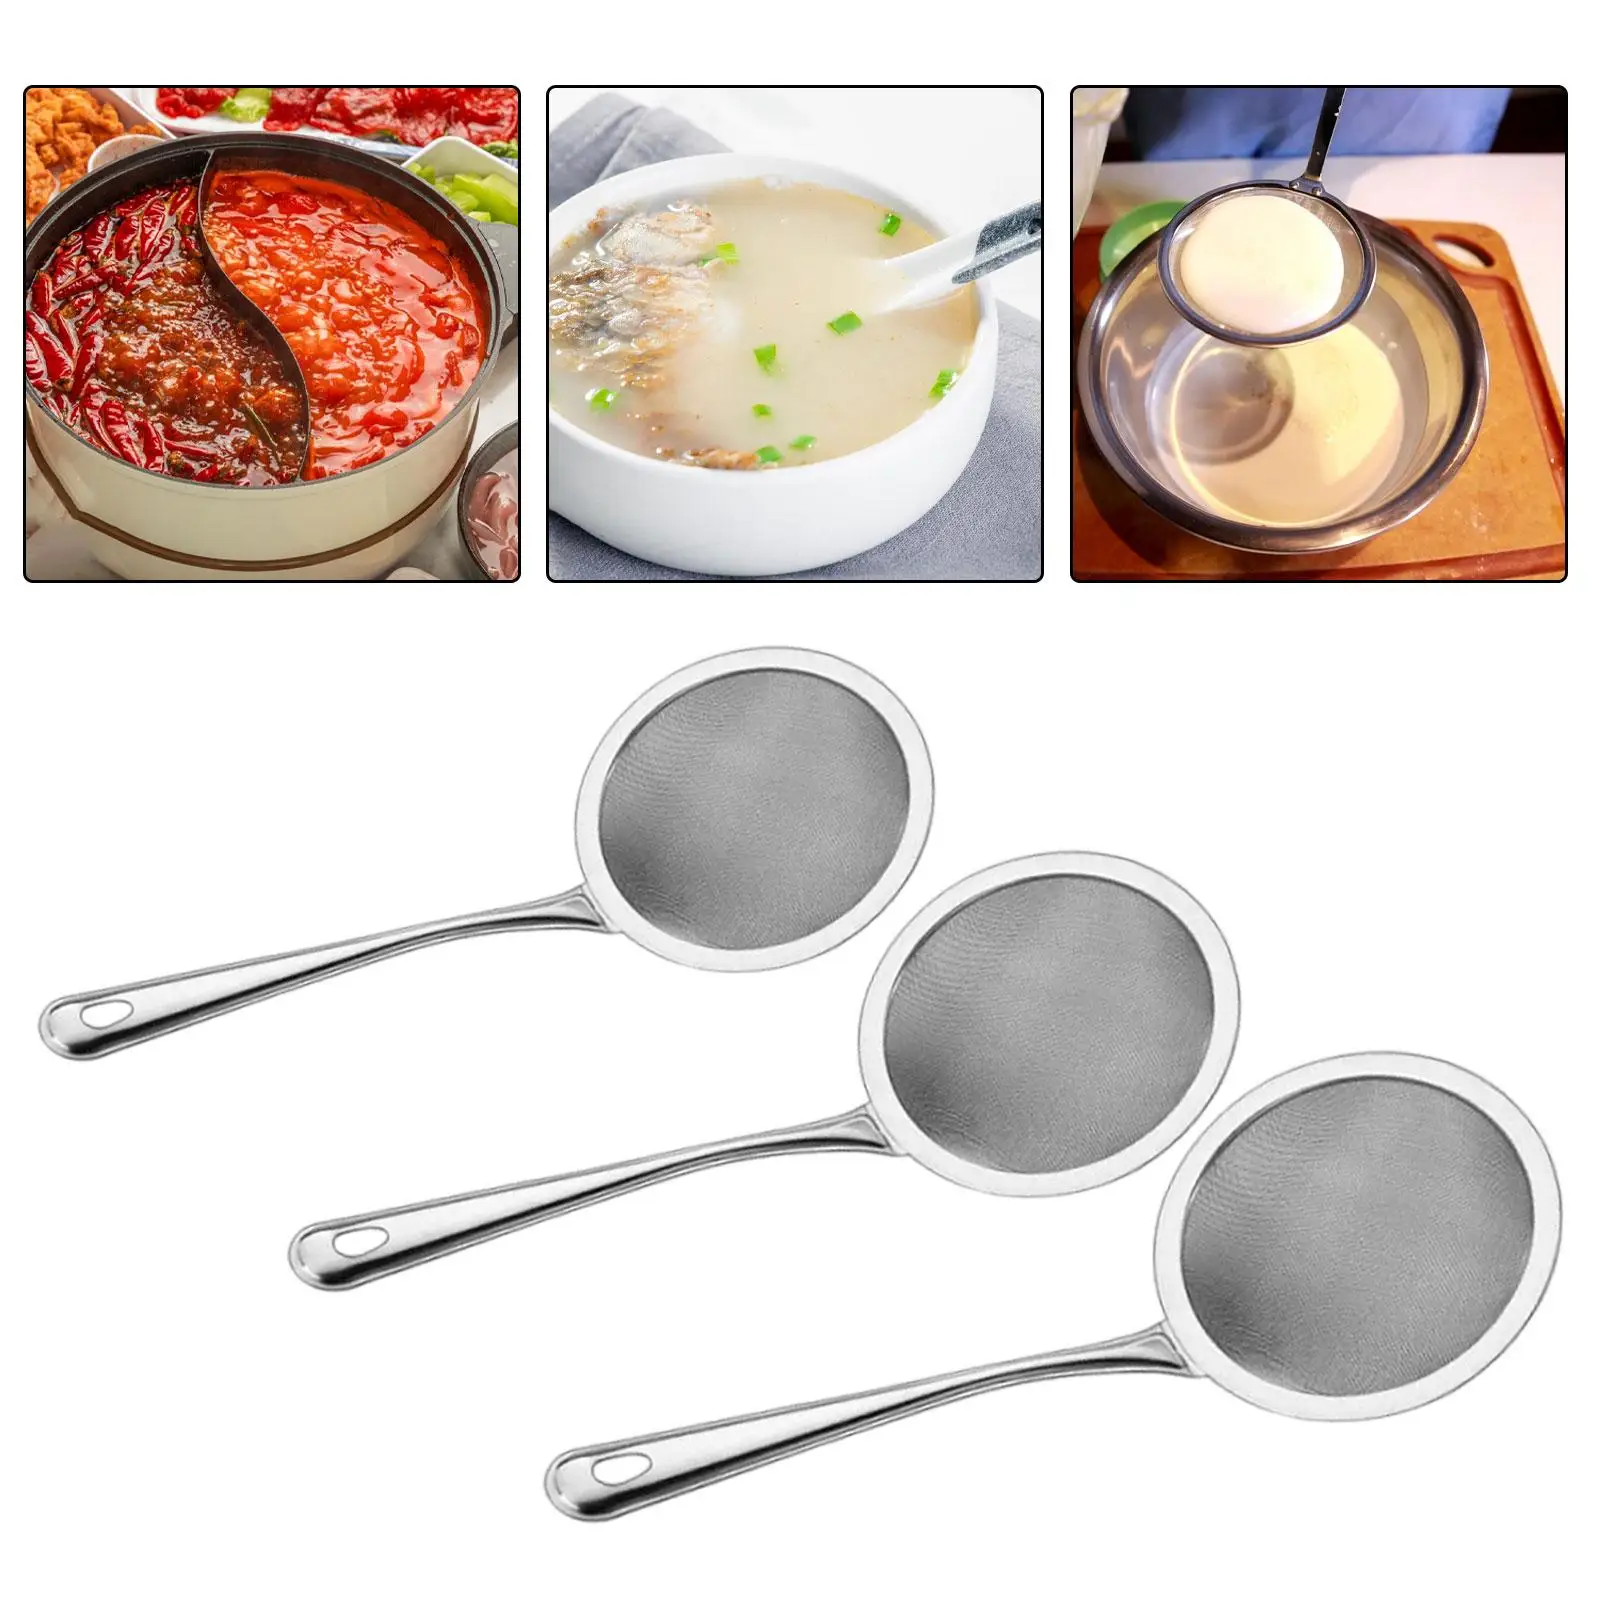 Stainless Steel Fine Mesh Food Strainer Sieve Sifter Hot Pot Skimmer with Long Handle